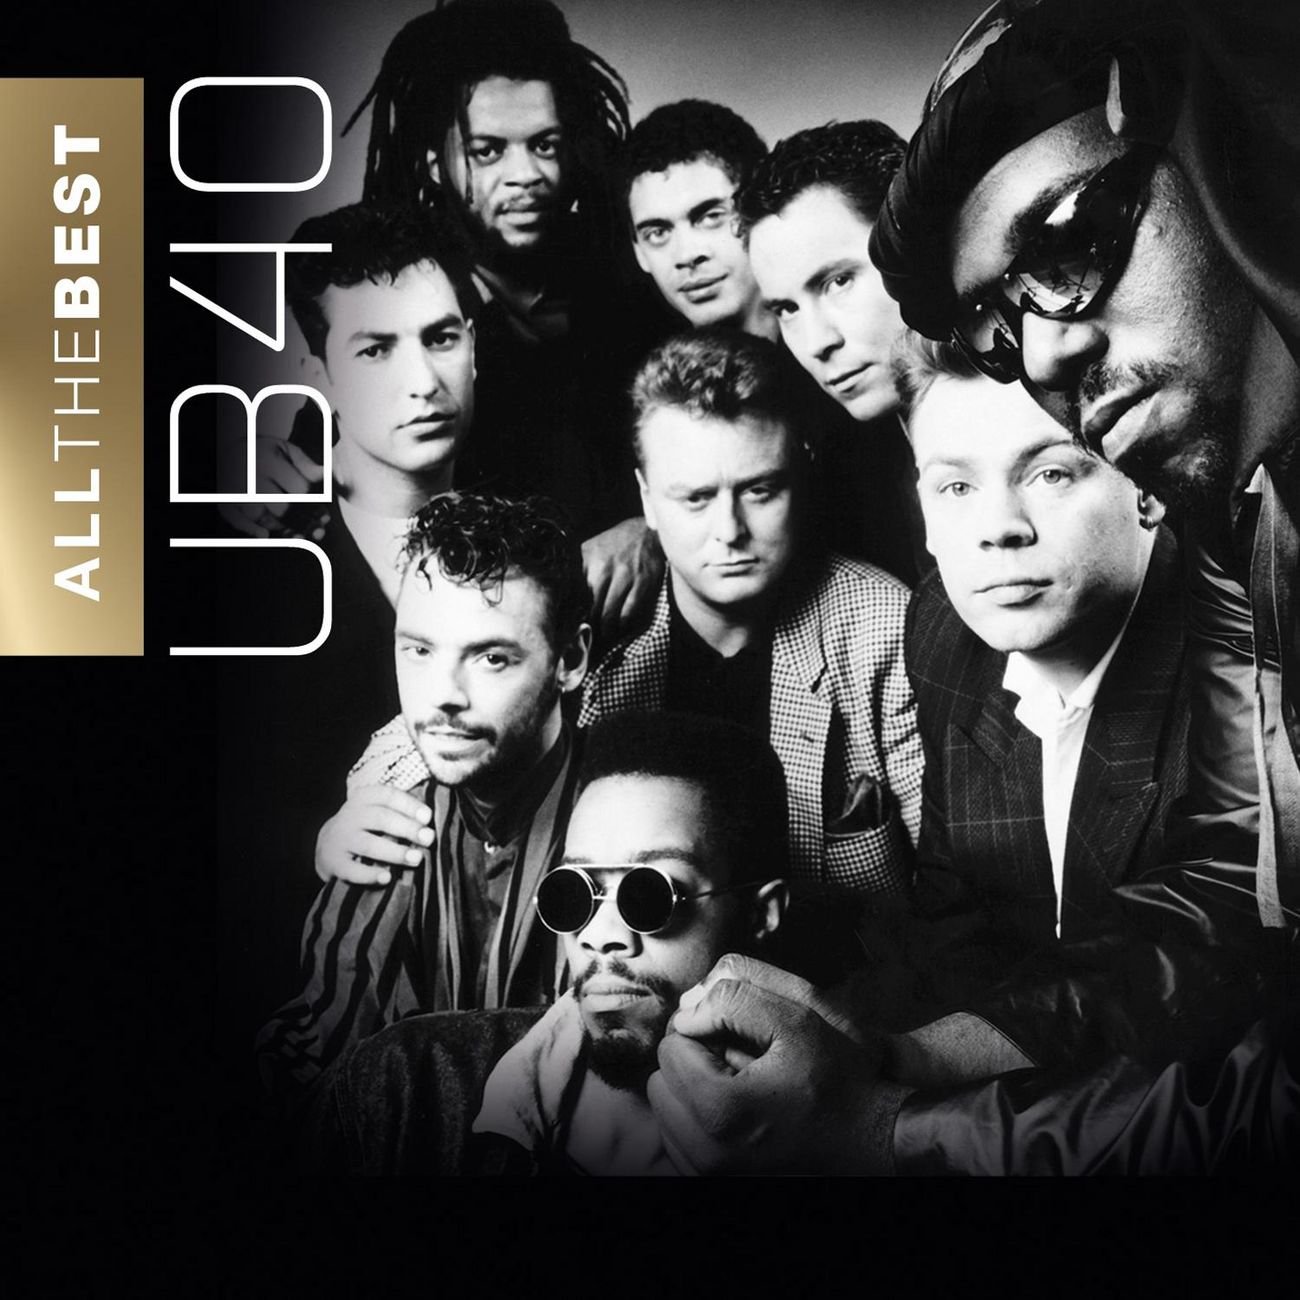 All the Best — UB40 | Last.fm